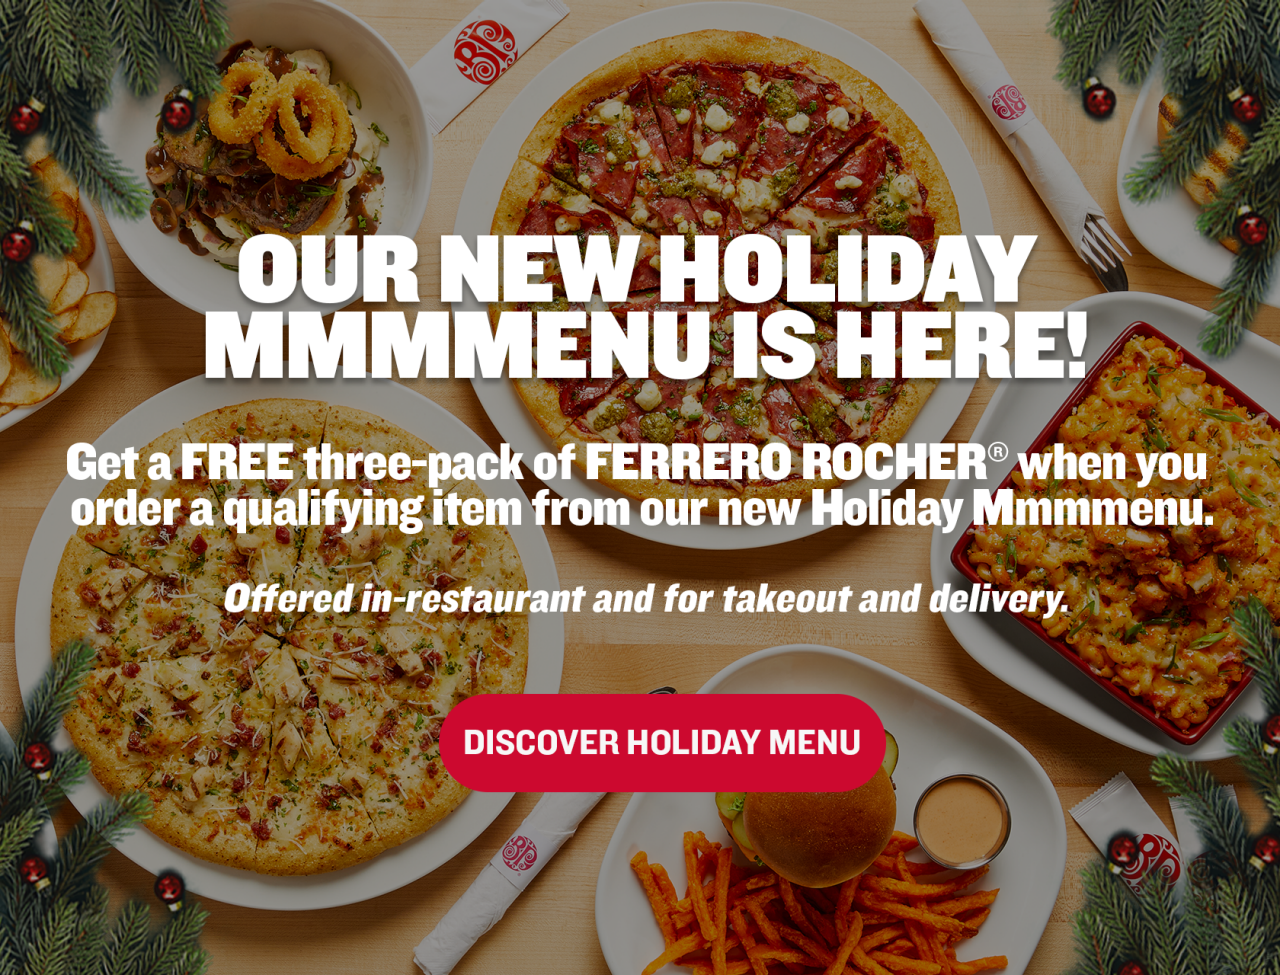 OUR NEW HOLIDAY MENU IS HERE